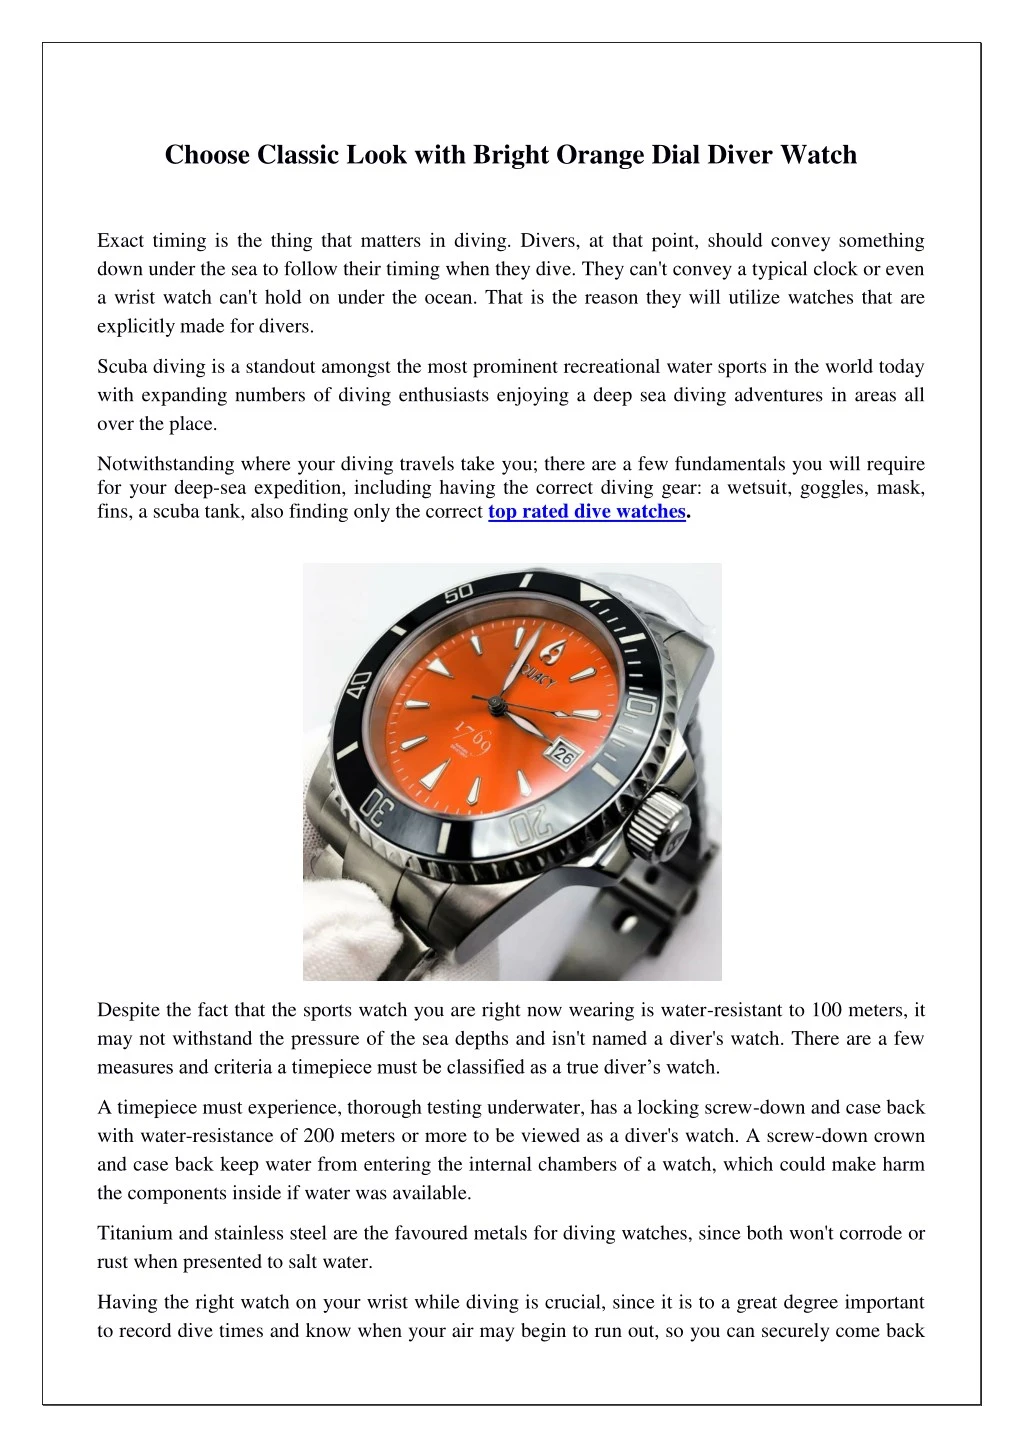 choose classic look with bright orange dial diver